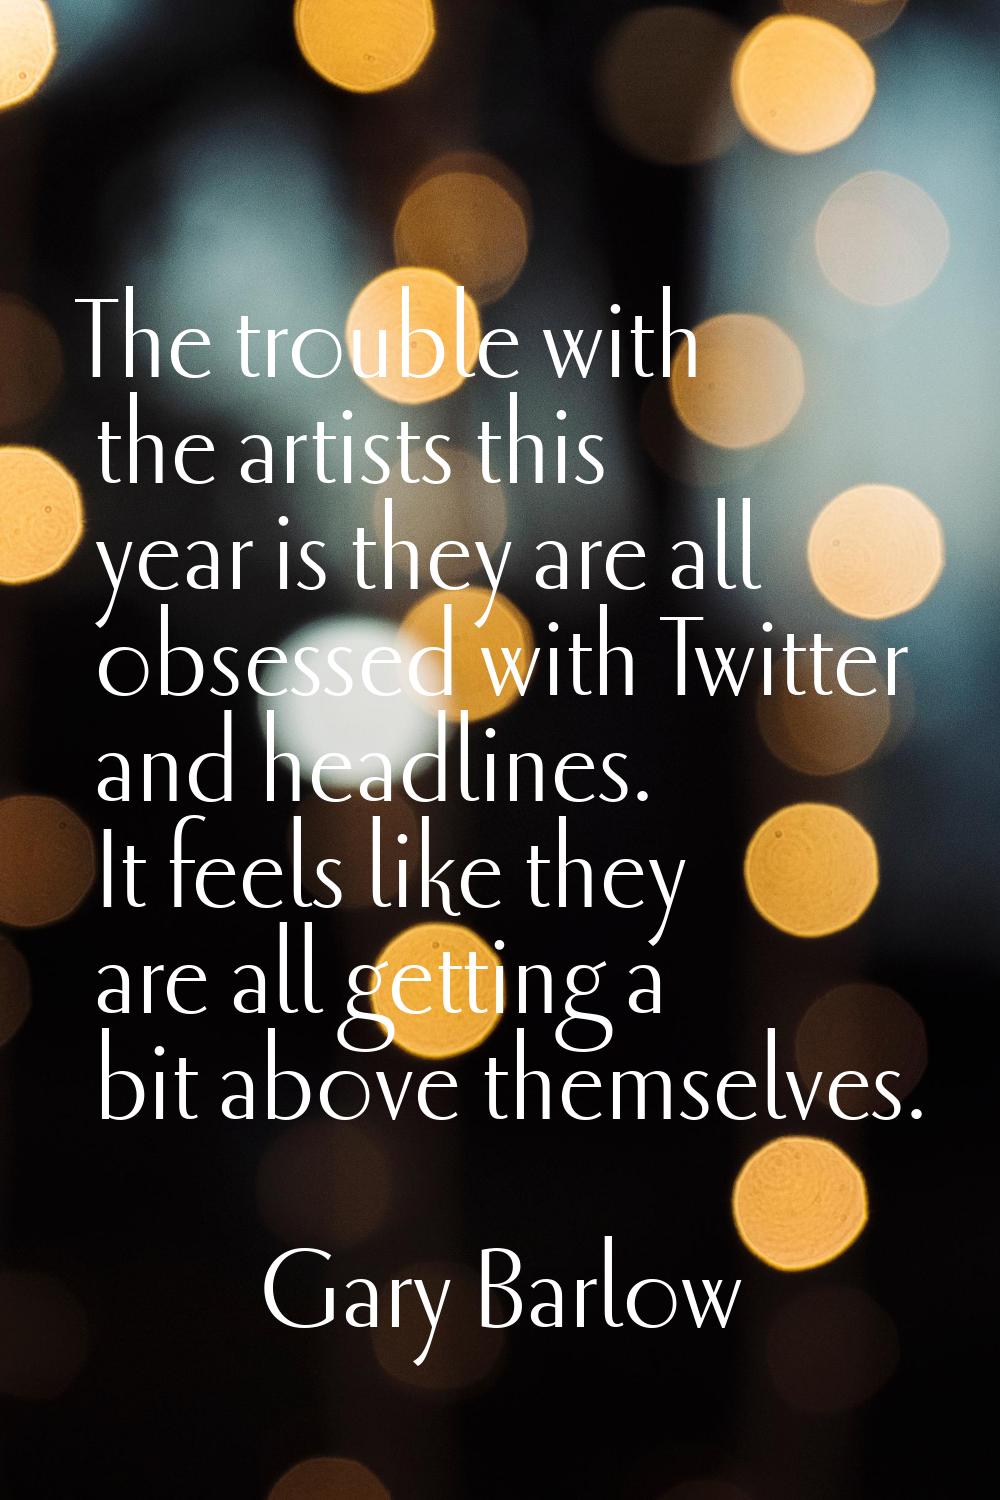 The trouble with the artists this year is they are all obsessed with Twitter and headlines. It feel